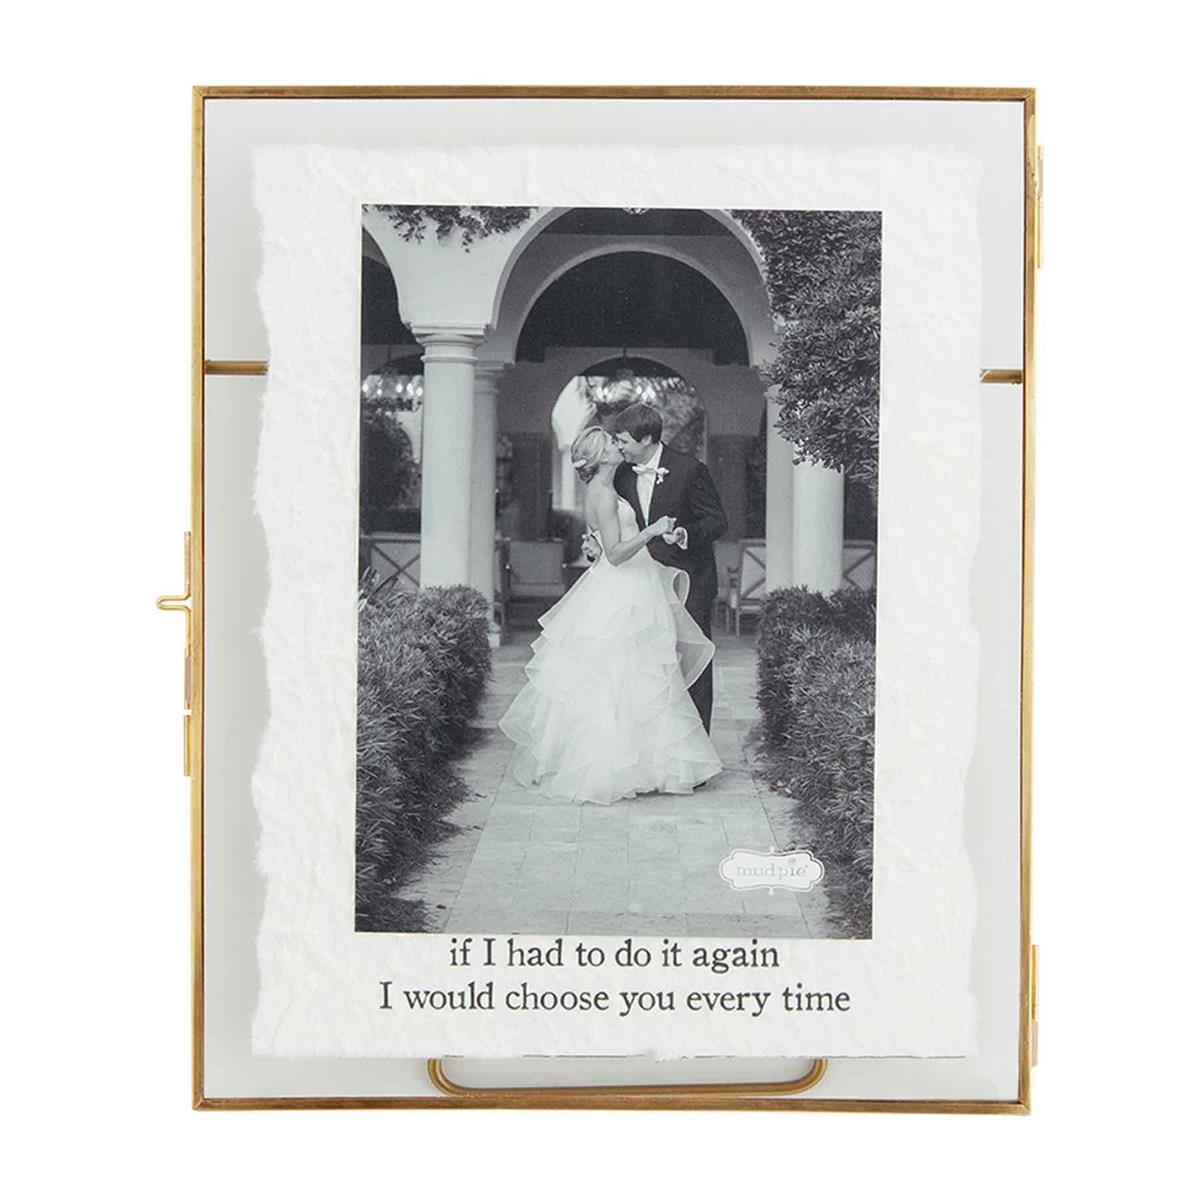 mud pie gold frame if i had to do it again i would choose you every time